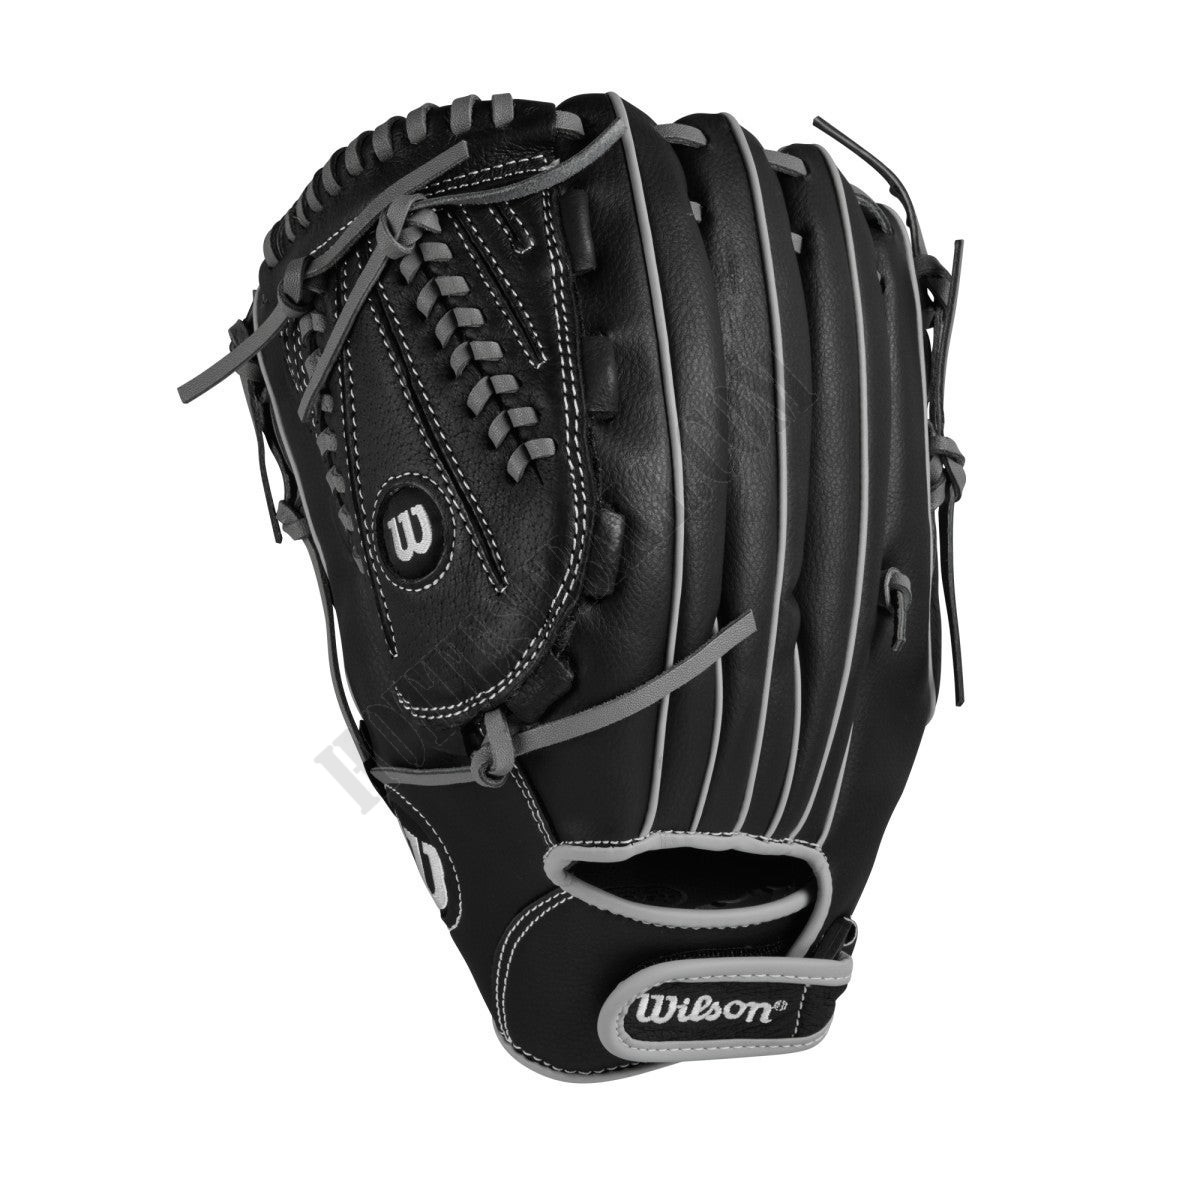 A360 13" Slowpitch Glove - Left Hand Throw ● Wilson Promotions - -1